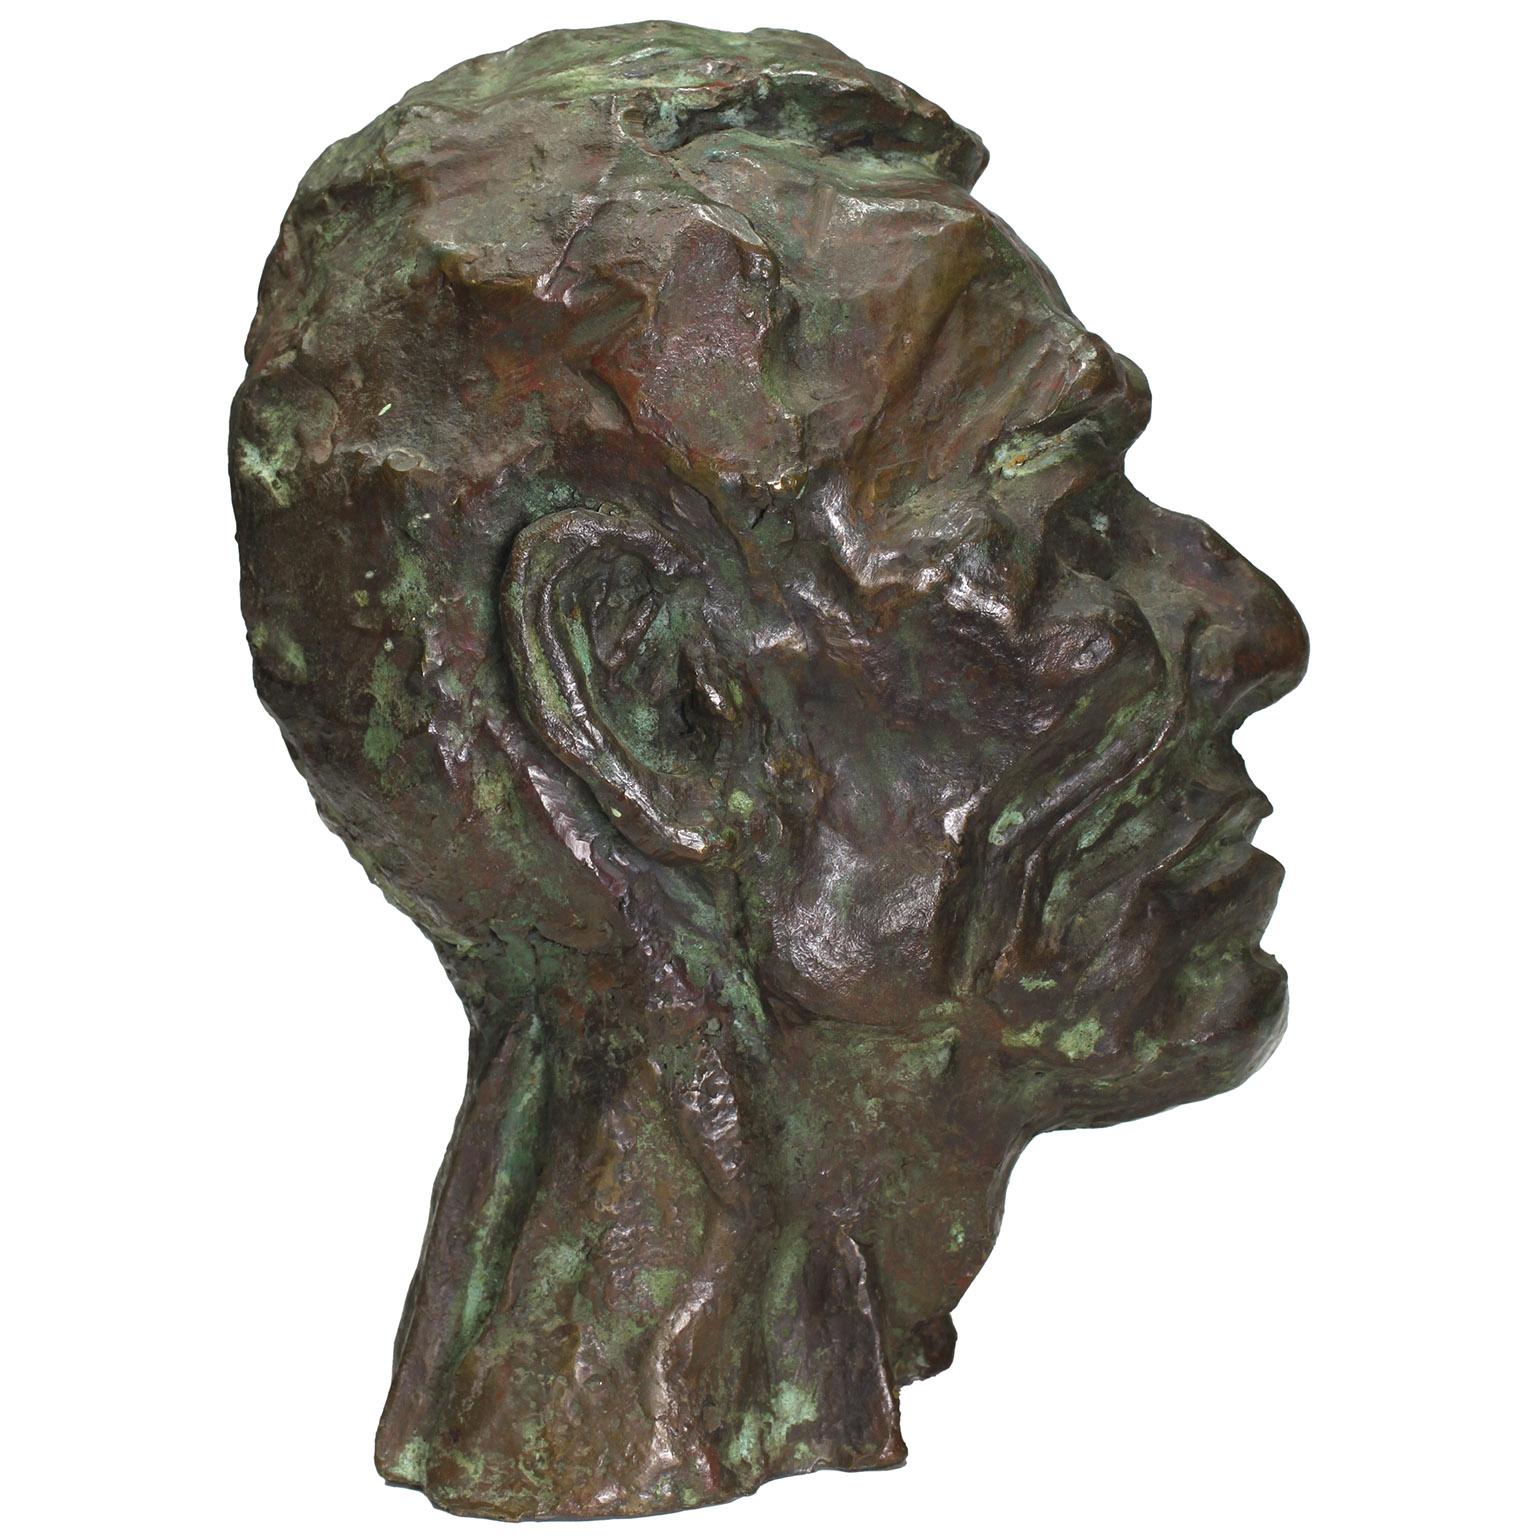 Patinated Fine Bronze Bust of a Man in Manner of Sir Jacob Epstein (British 1880-1959) For Sale